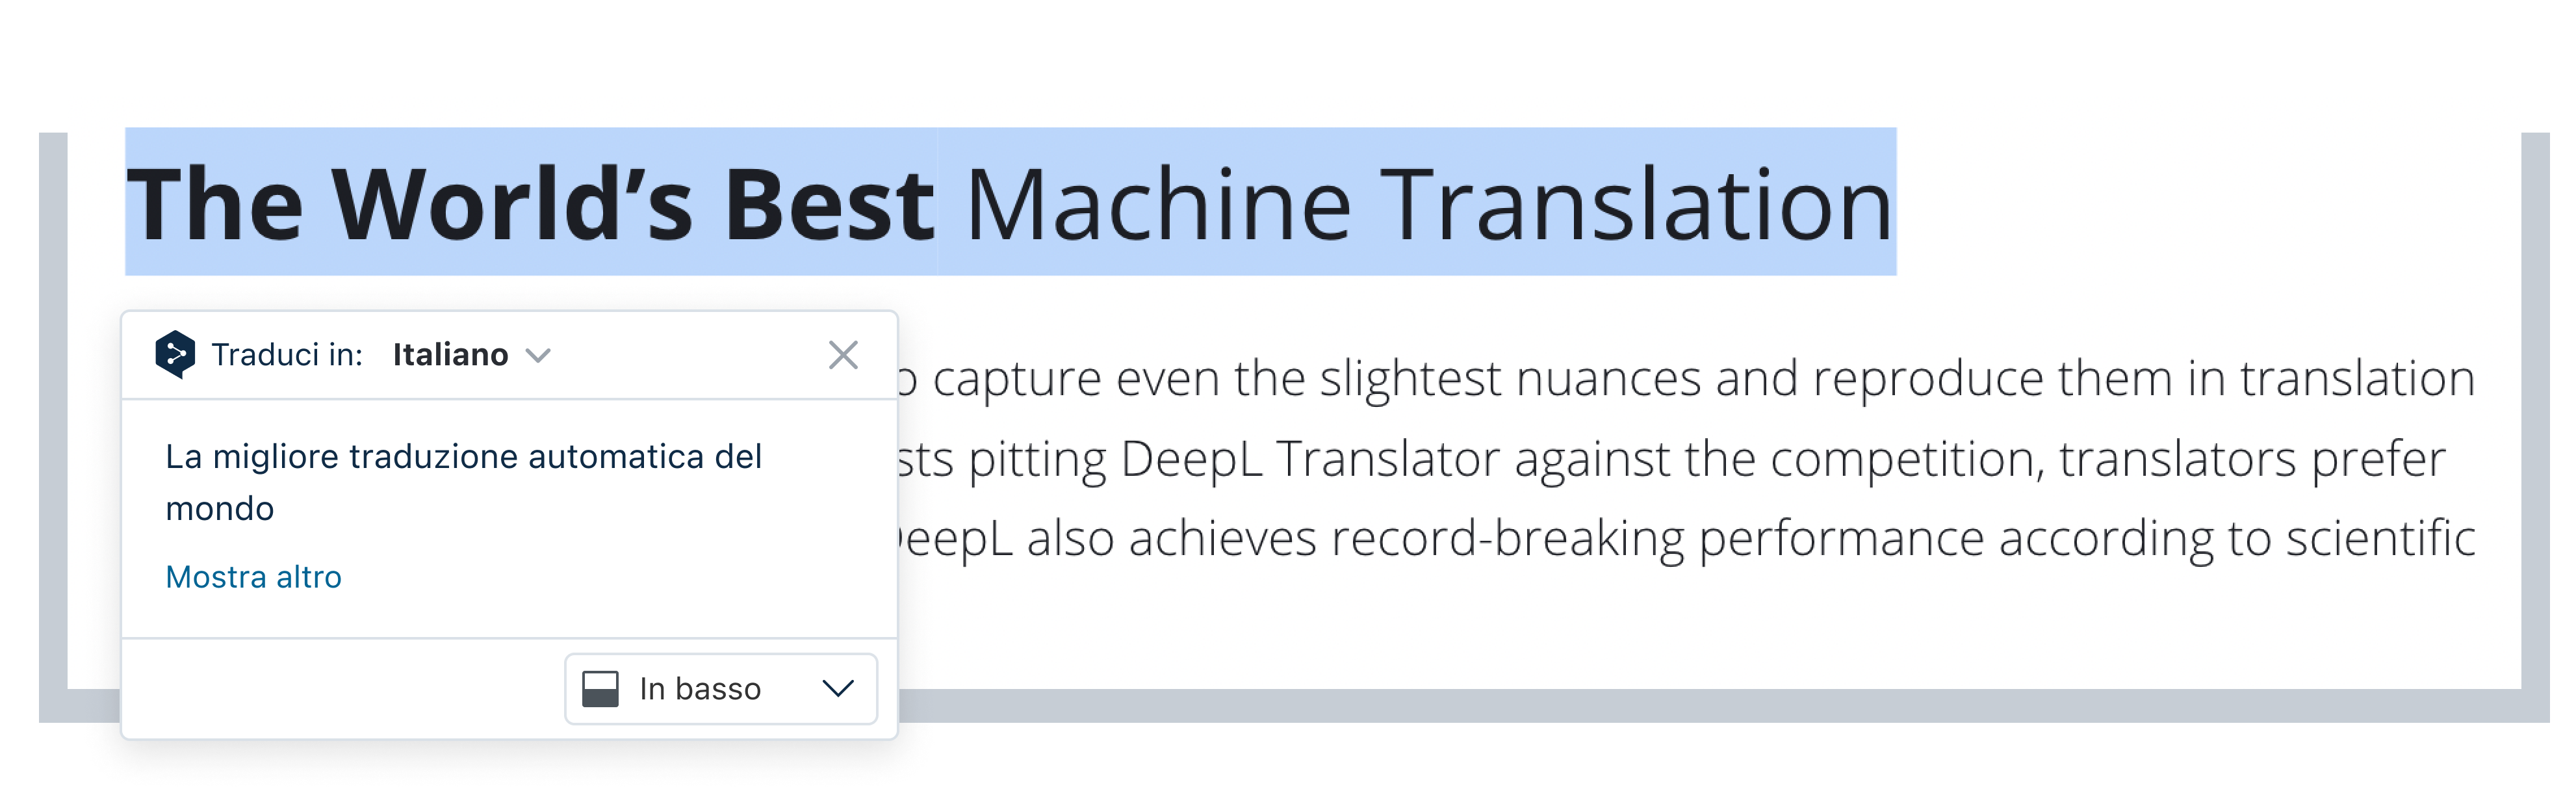 On the DeepL website, the text "The World's Best Machine Translation" is highlight, and the Chrome Extension icon pops up, which depicts the sentence translated to German.